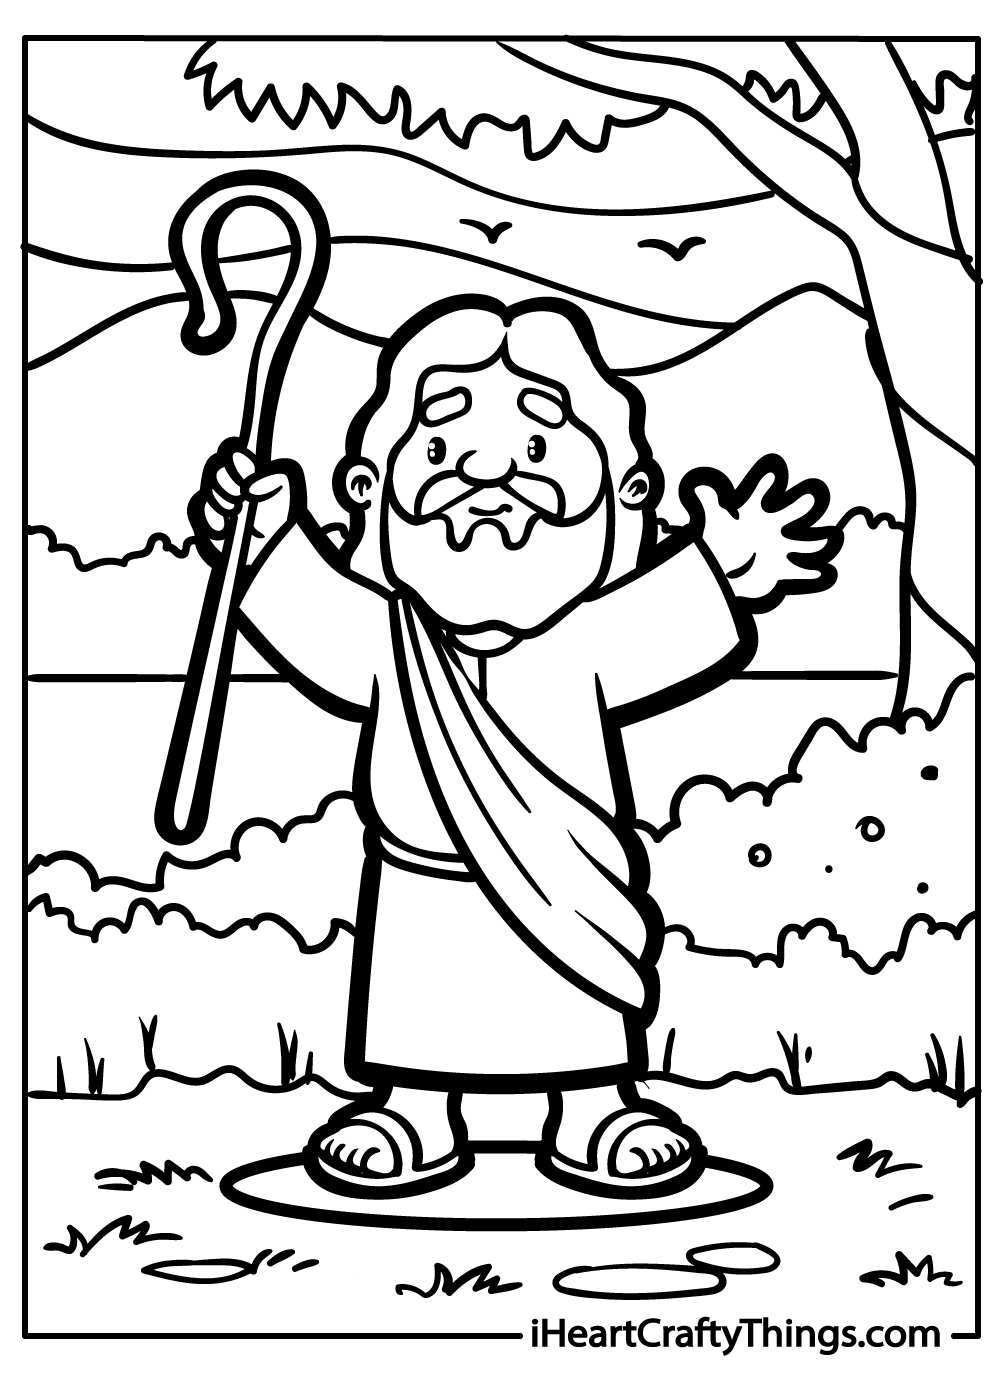 jesus coloring pages for kids